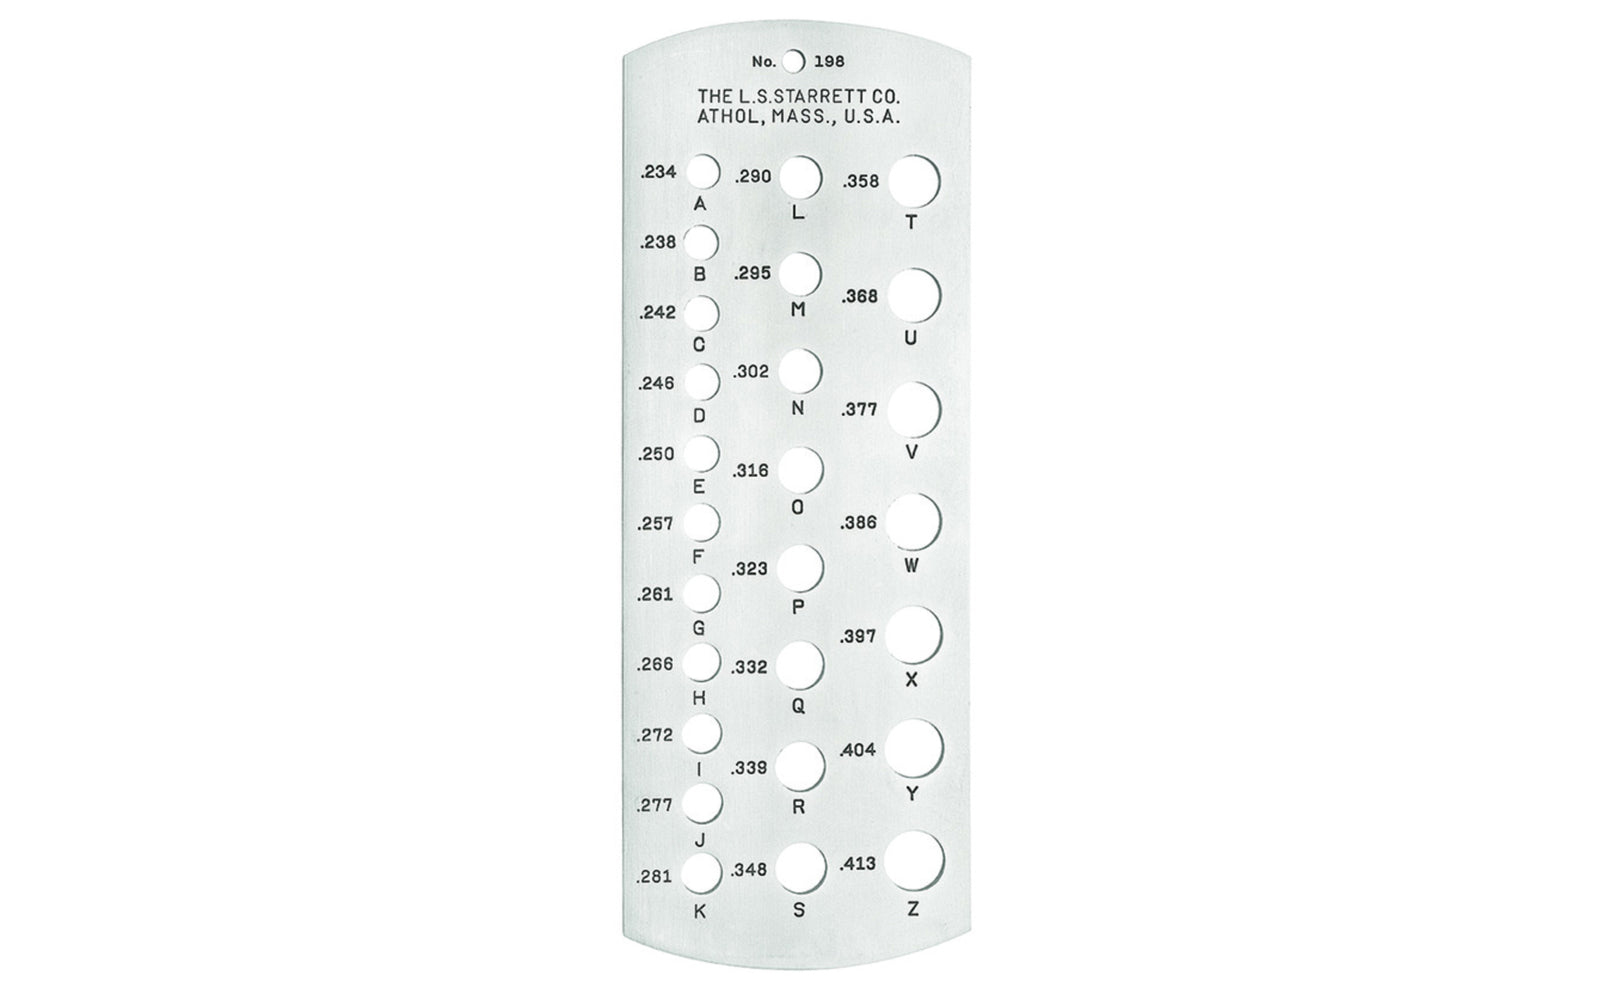 198 Standard Letter Size Drill Gage provides quick, convenient checking of letter size drills. Twenty-six holes are provided, giving corresponding drill sizes from A through Z - with decimal equivalents from .234" diameter through .413" diameter.  Made in USA.